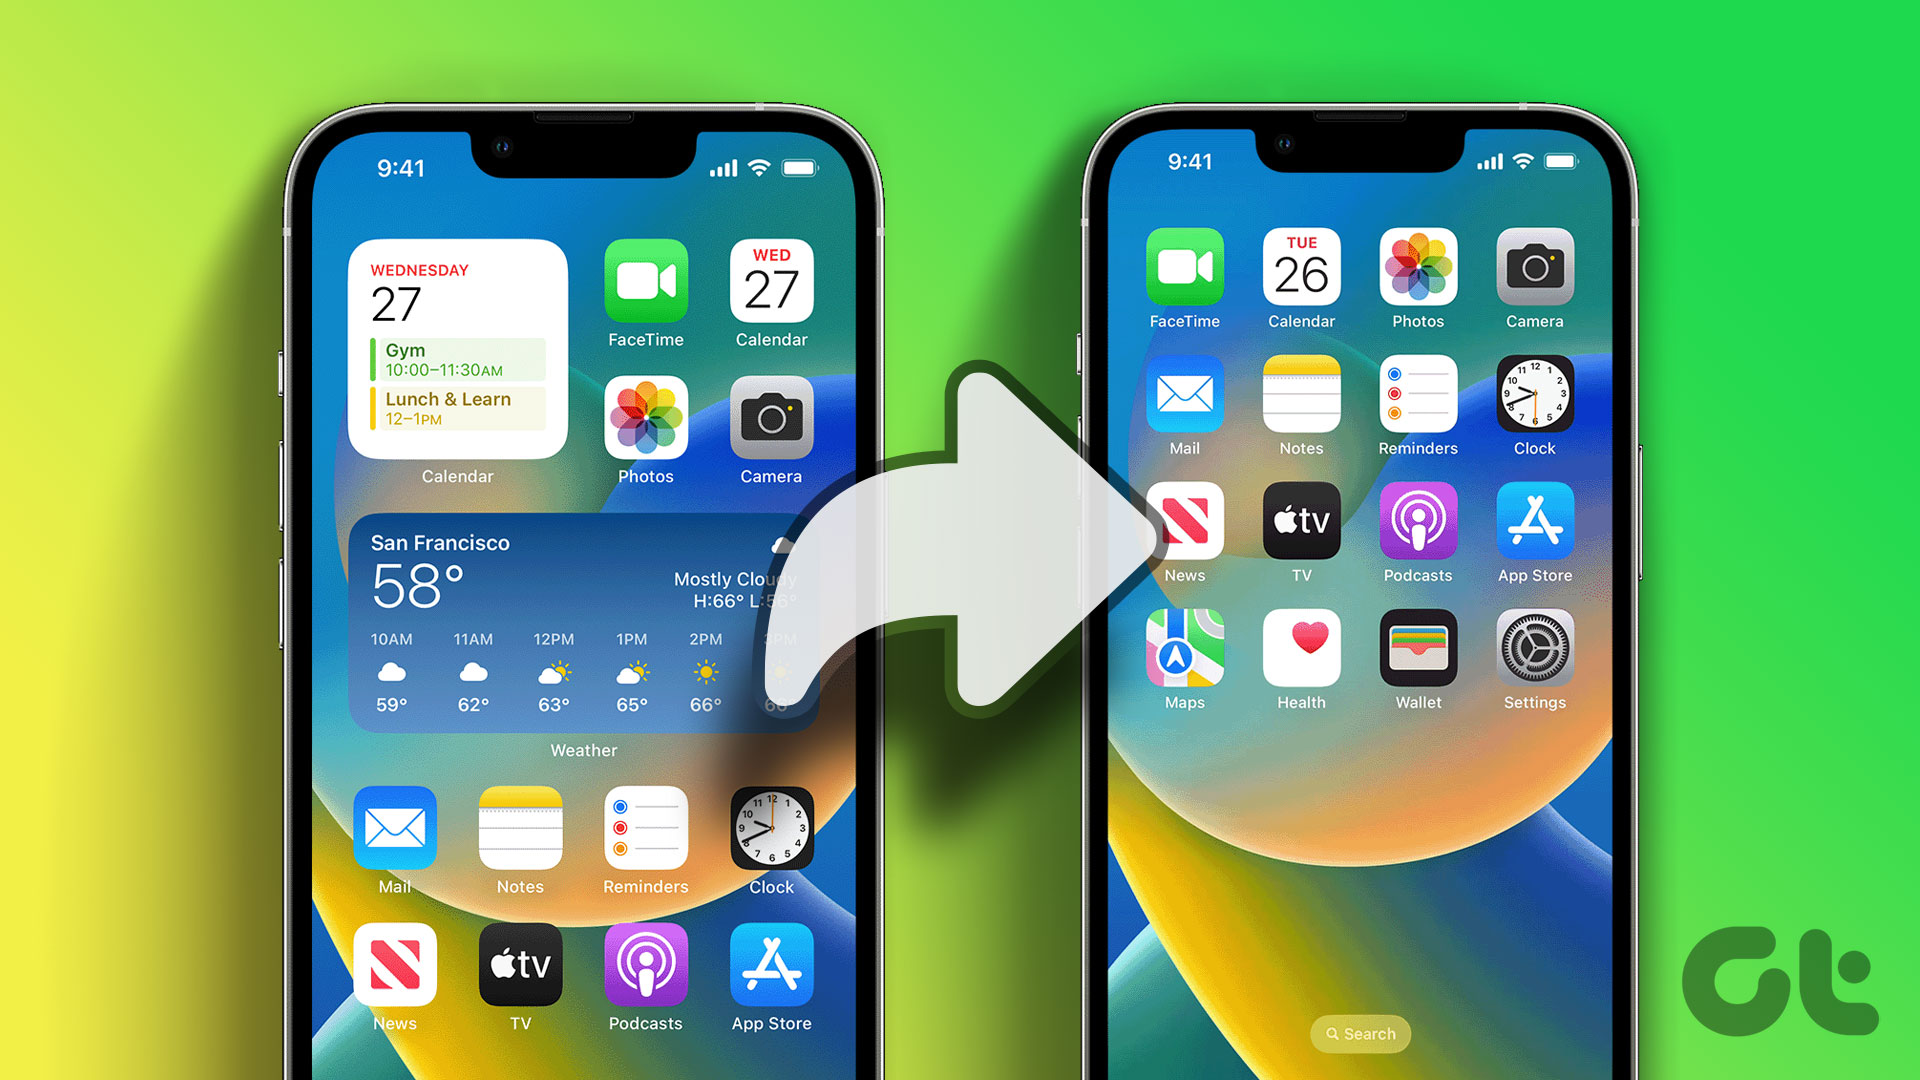 How to Reset Home Screen Layout on iPhone to Default